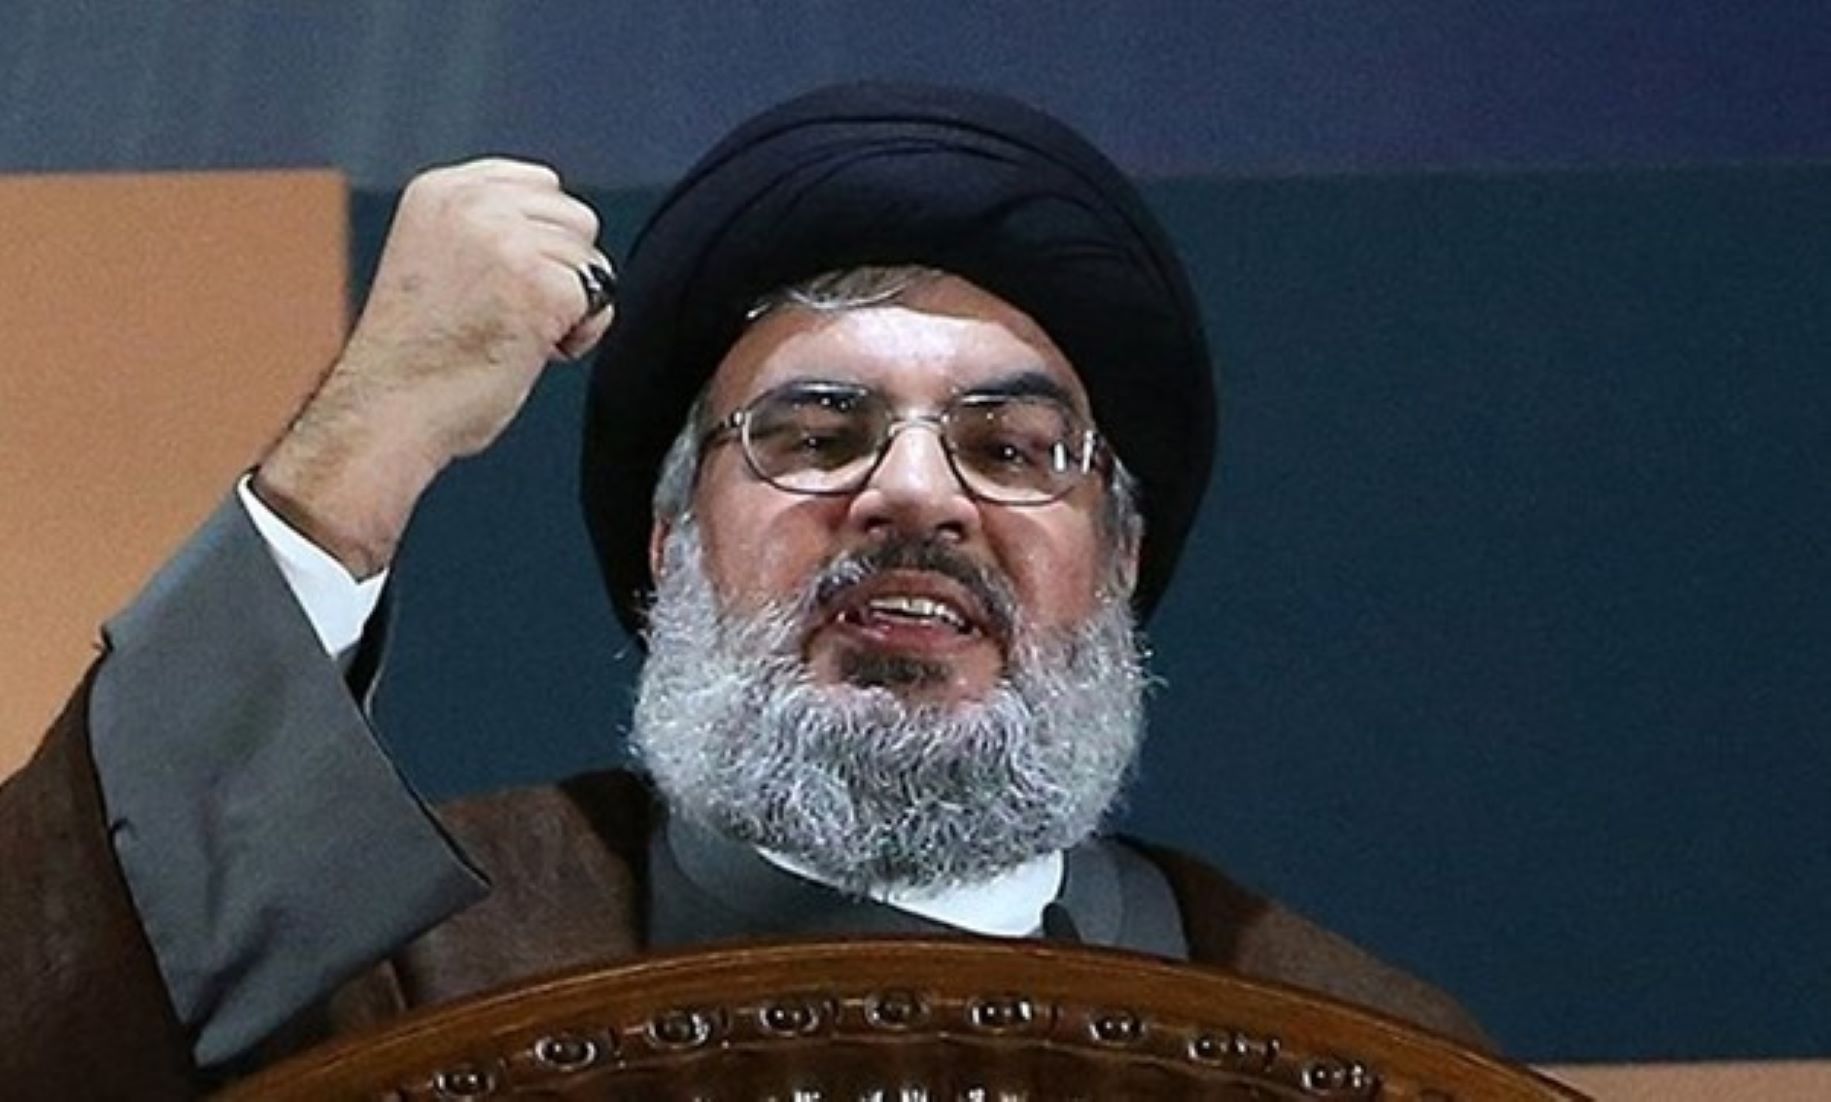 Hezbollah Leader Threatens “All-Out War” In Response To Israel’s Warning